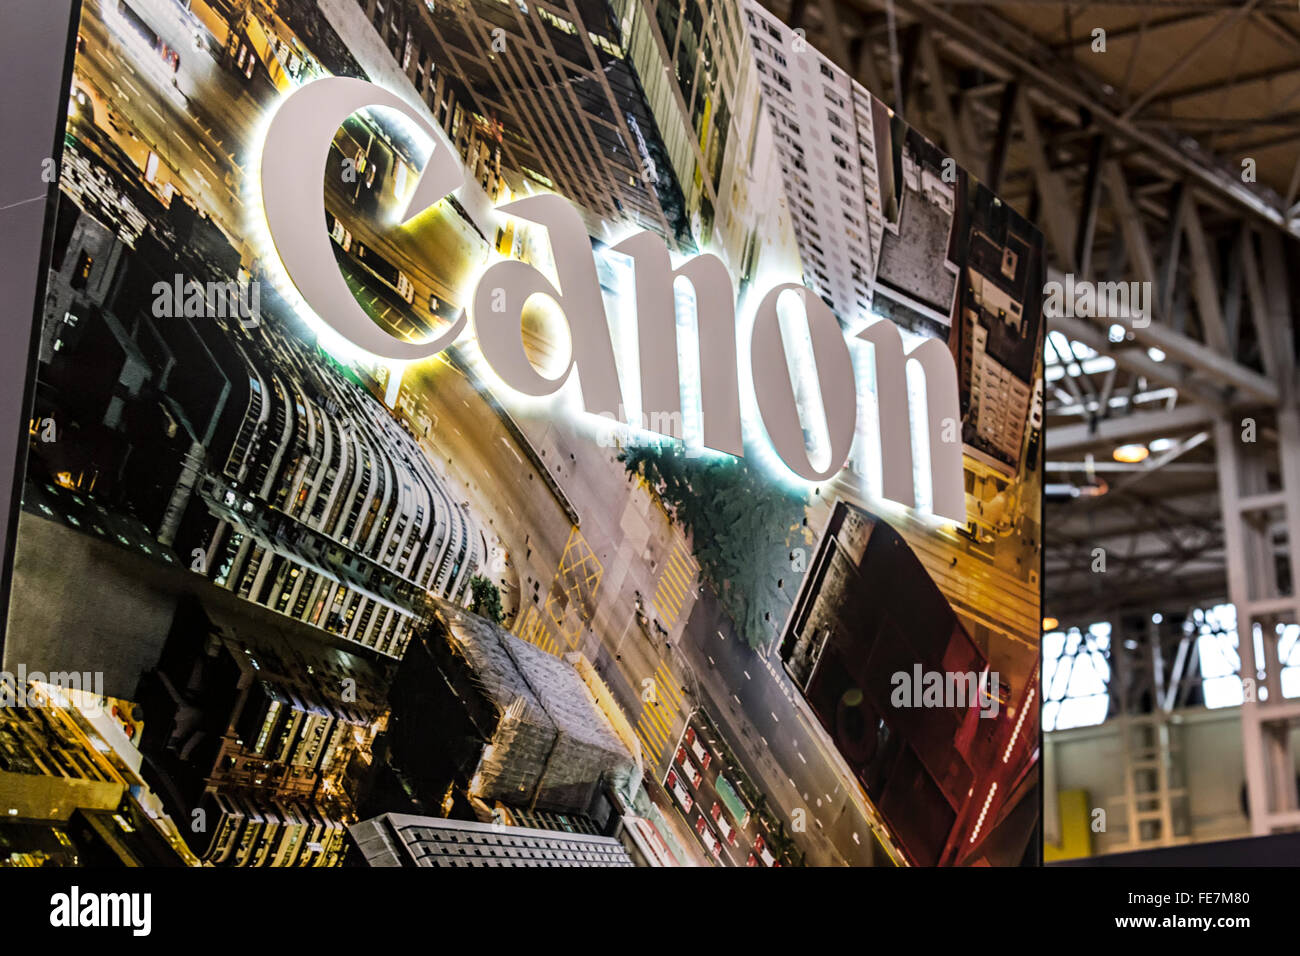 Canon camera sign at the Photography Show at the NEC, National Exhibition Centre, Birmingham, England, UK Stock Photo